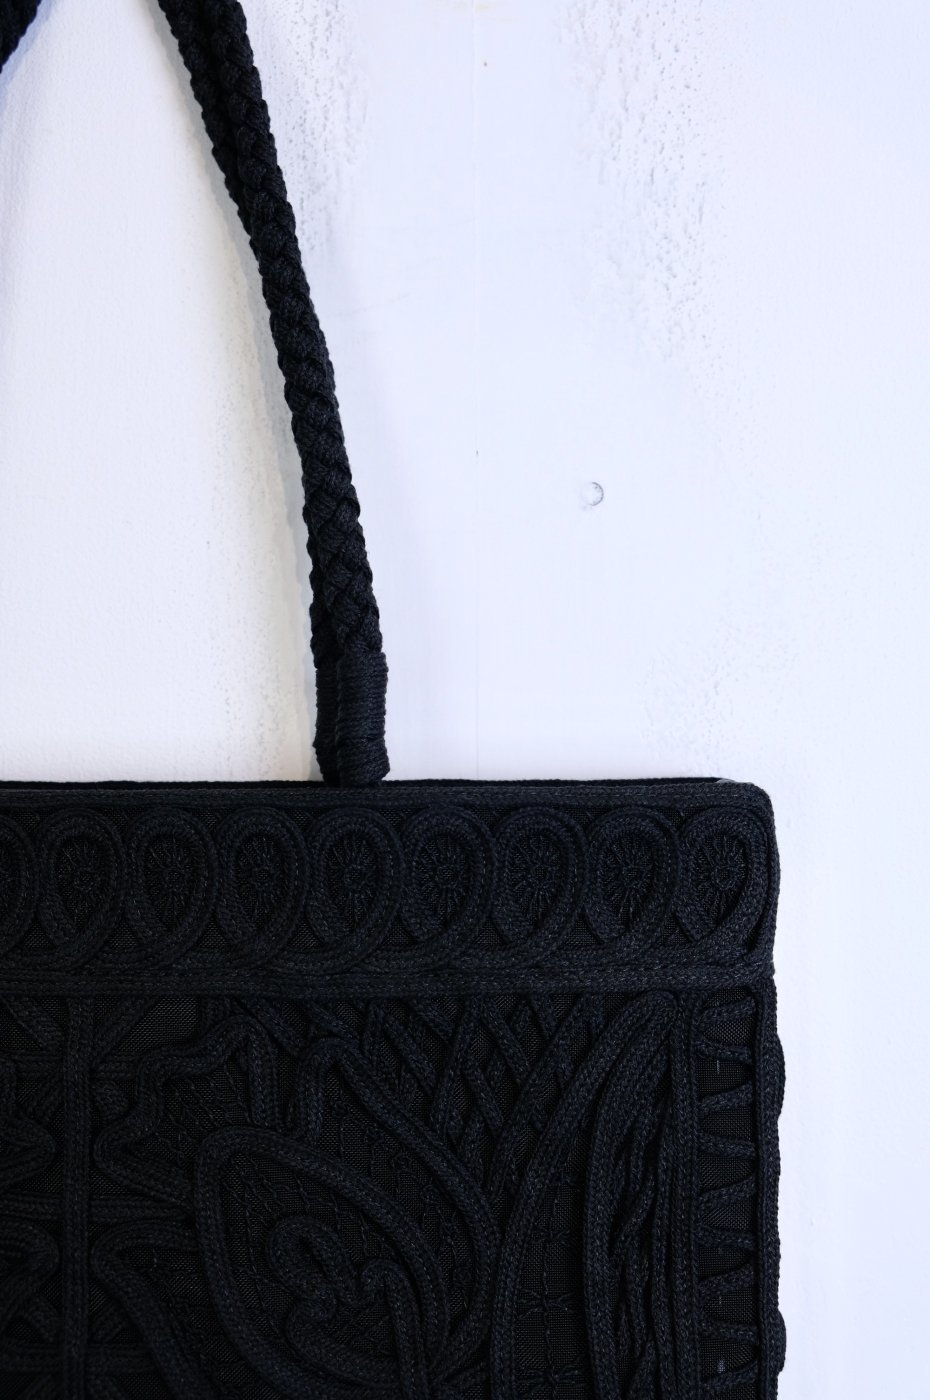 Cording Embroidery Tote Bag - black